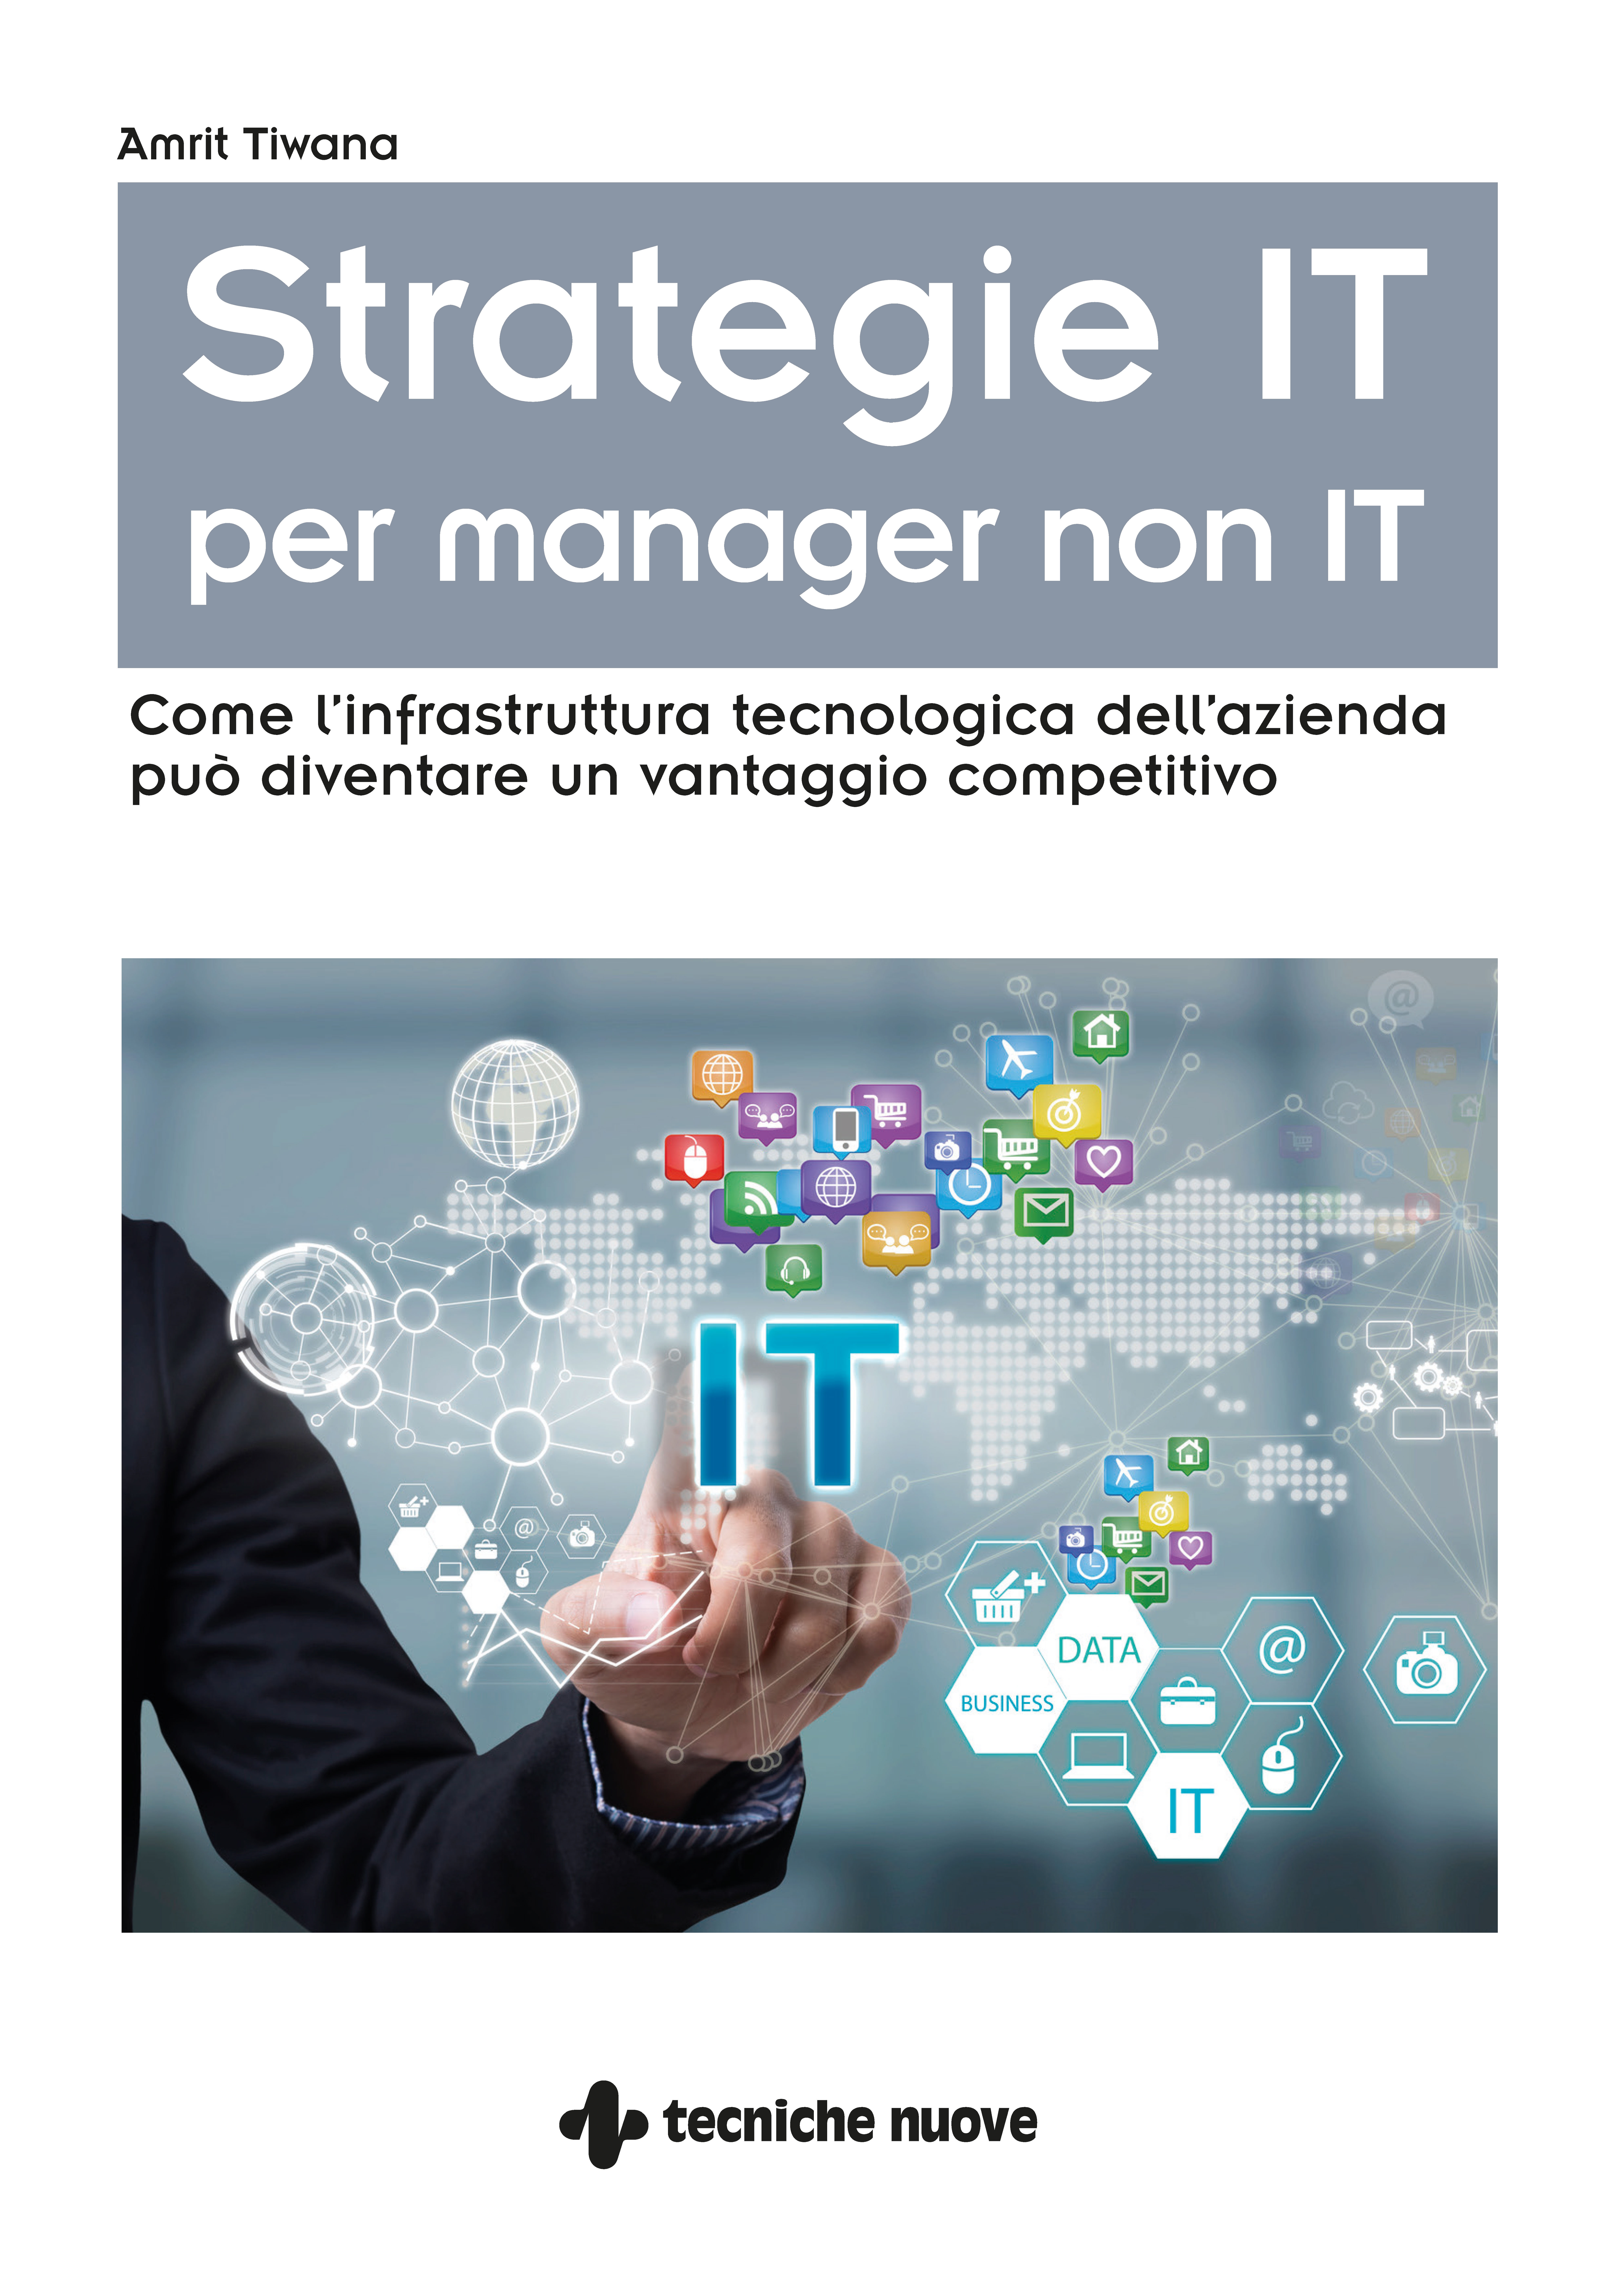 Strategie IT per manager non IT